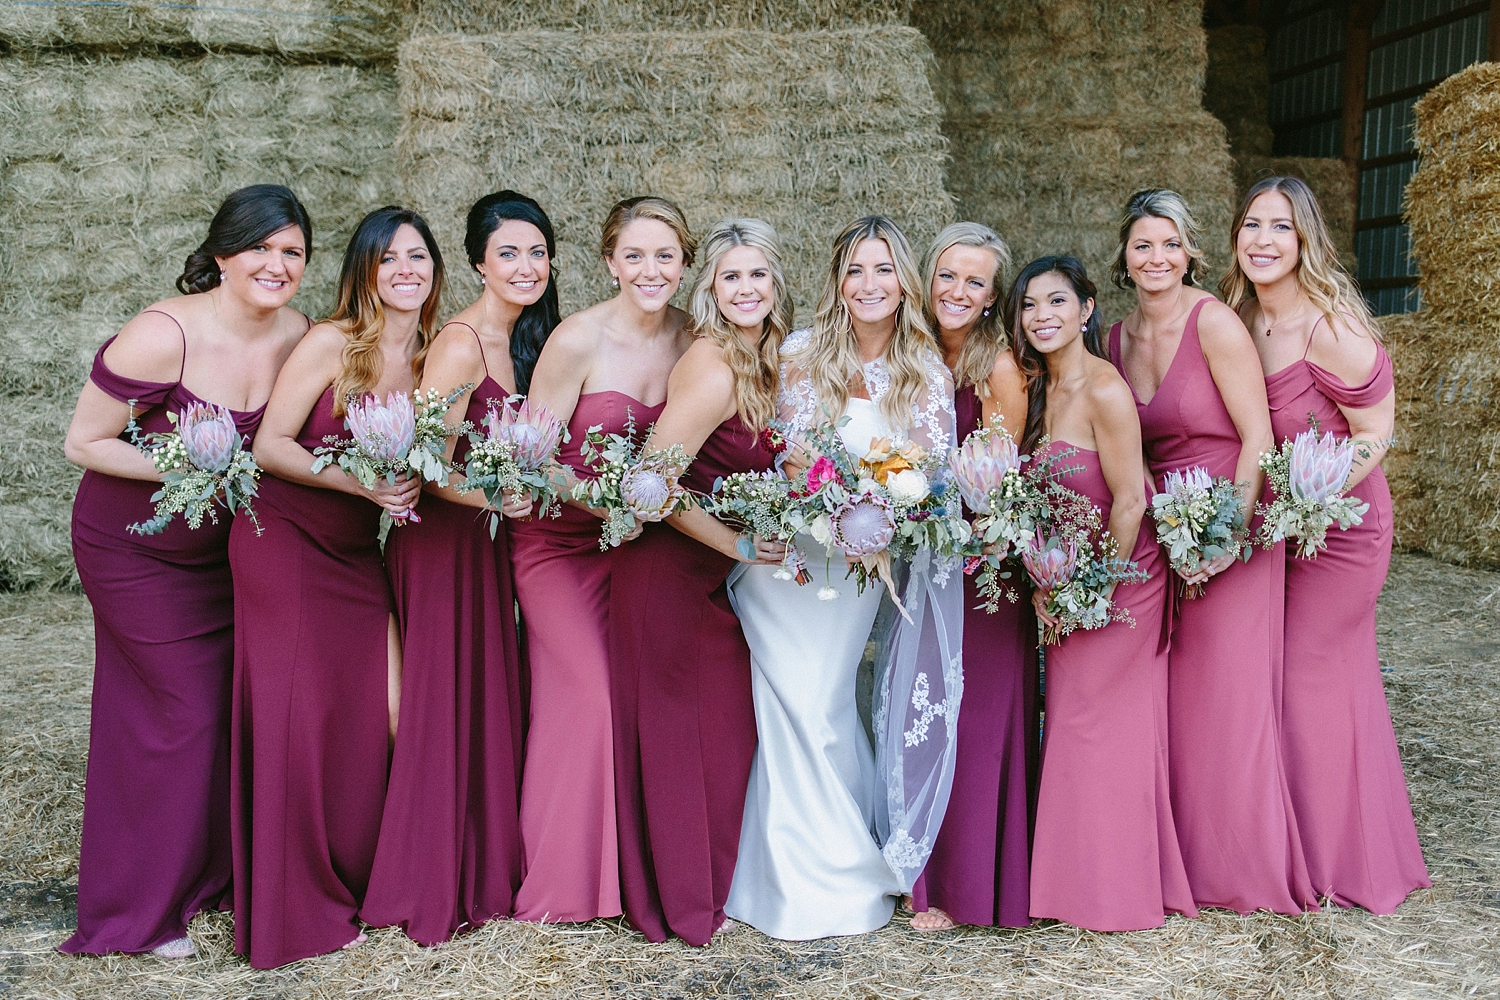 Bride and bridesmaids wearing reds and pinks